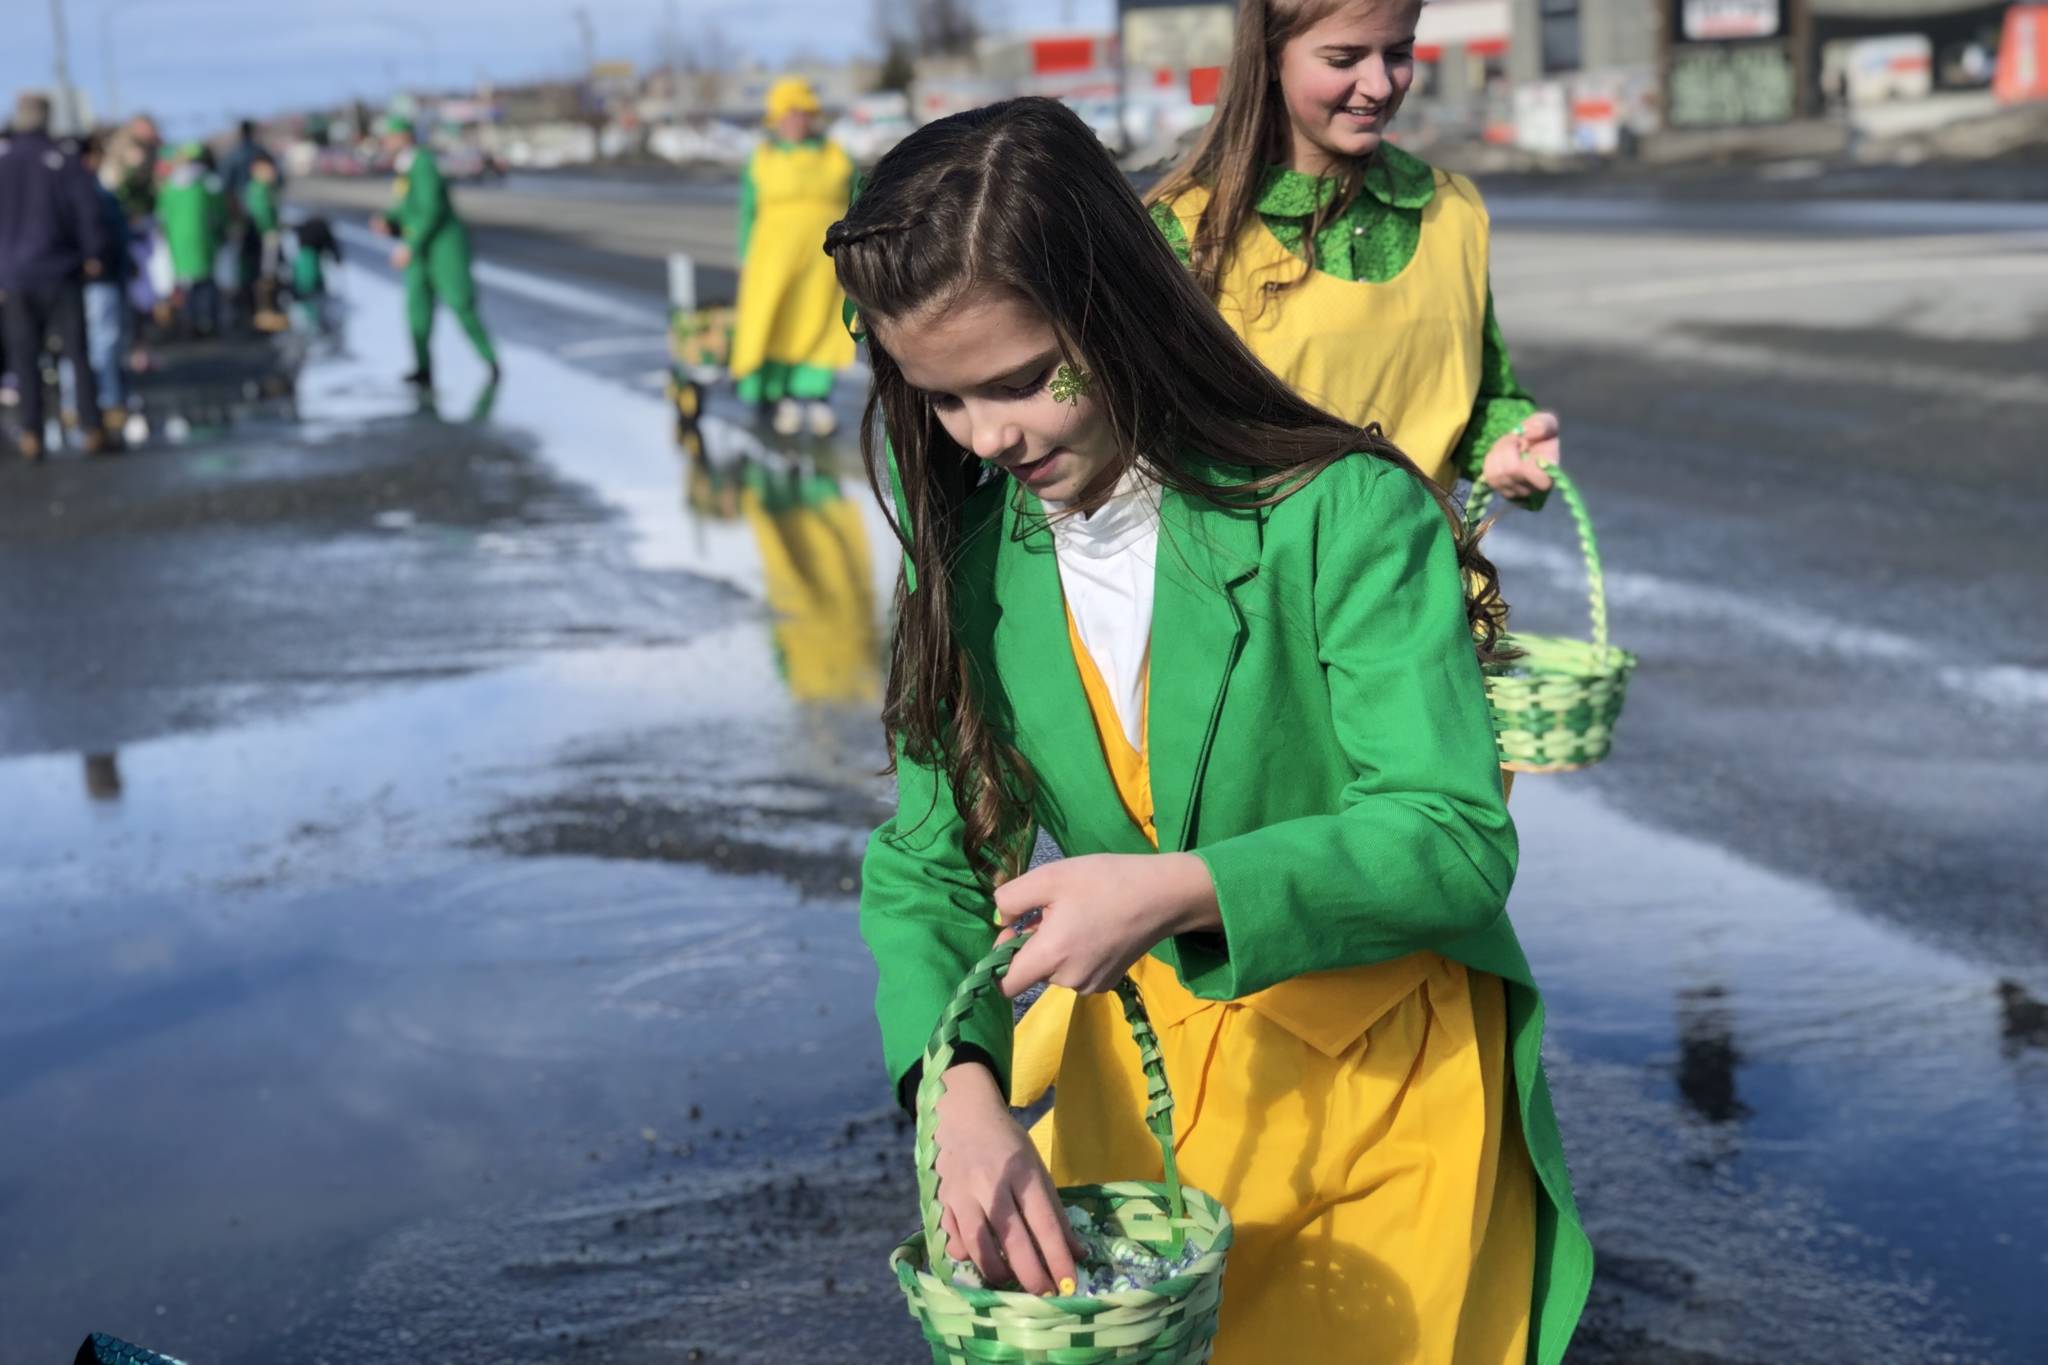 A parade participant passes out candy at Soldotna’s St. Patrick’s Day Parade on Sunday, March 17, 2019, in Soldotna, Alaska. (Photo by Victoria Petersen/Peninsula Clarion)